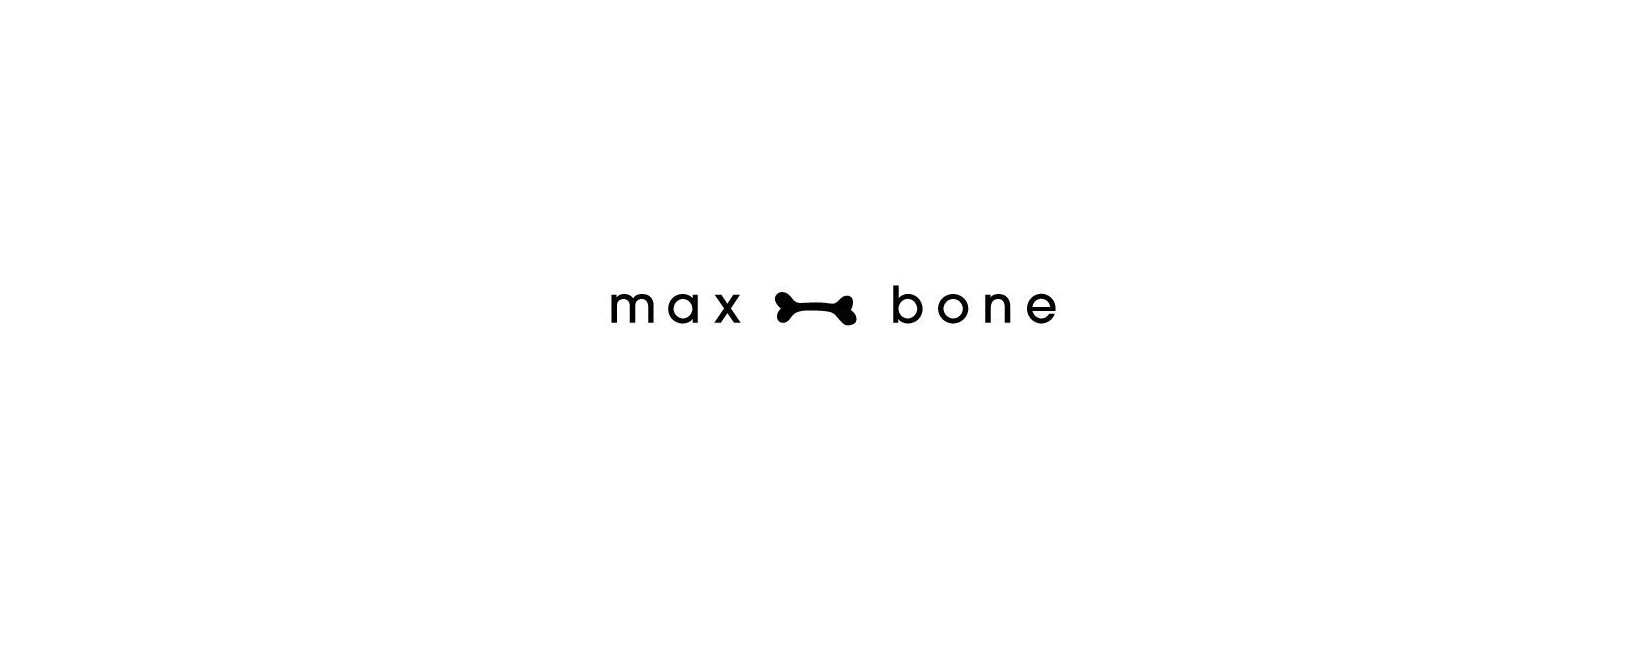 Maxbone Review : Healthy Meal For Pets